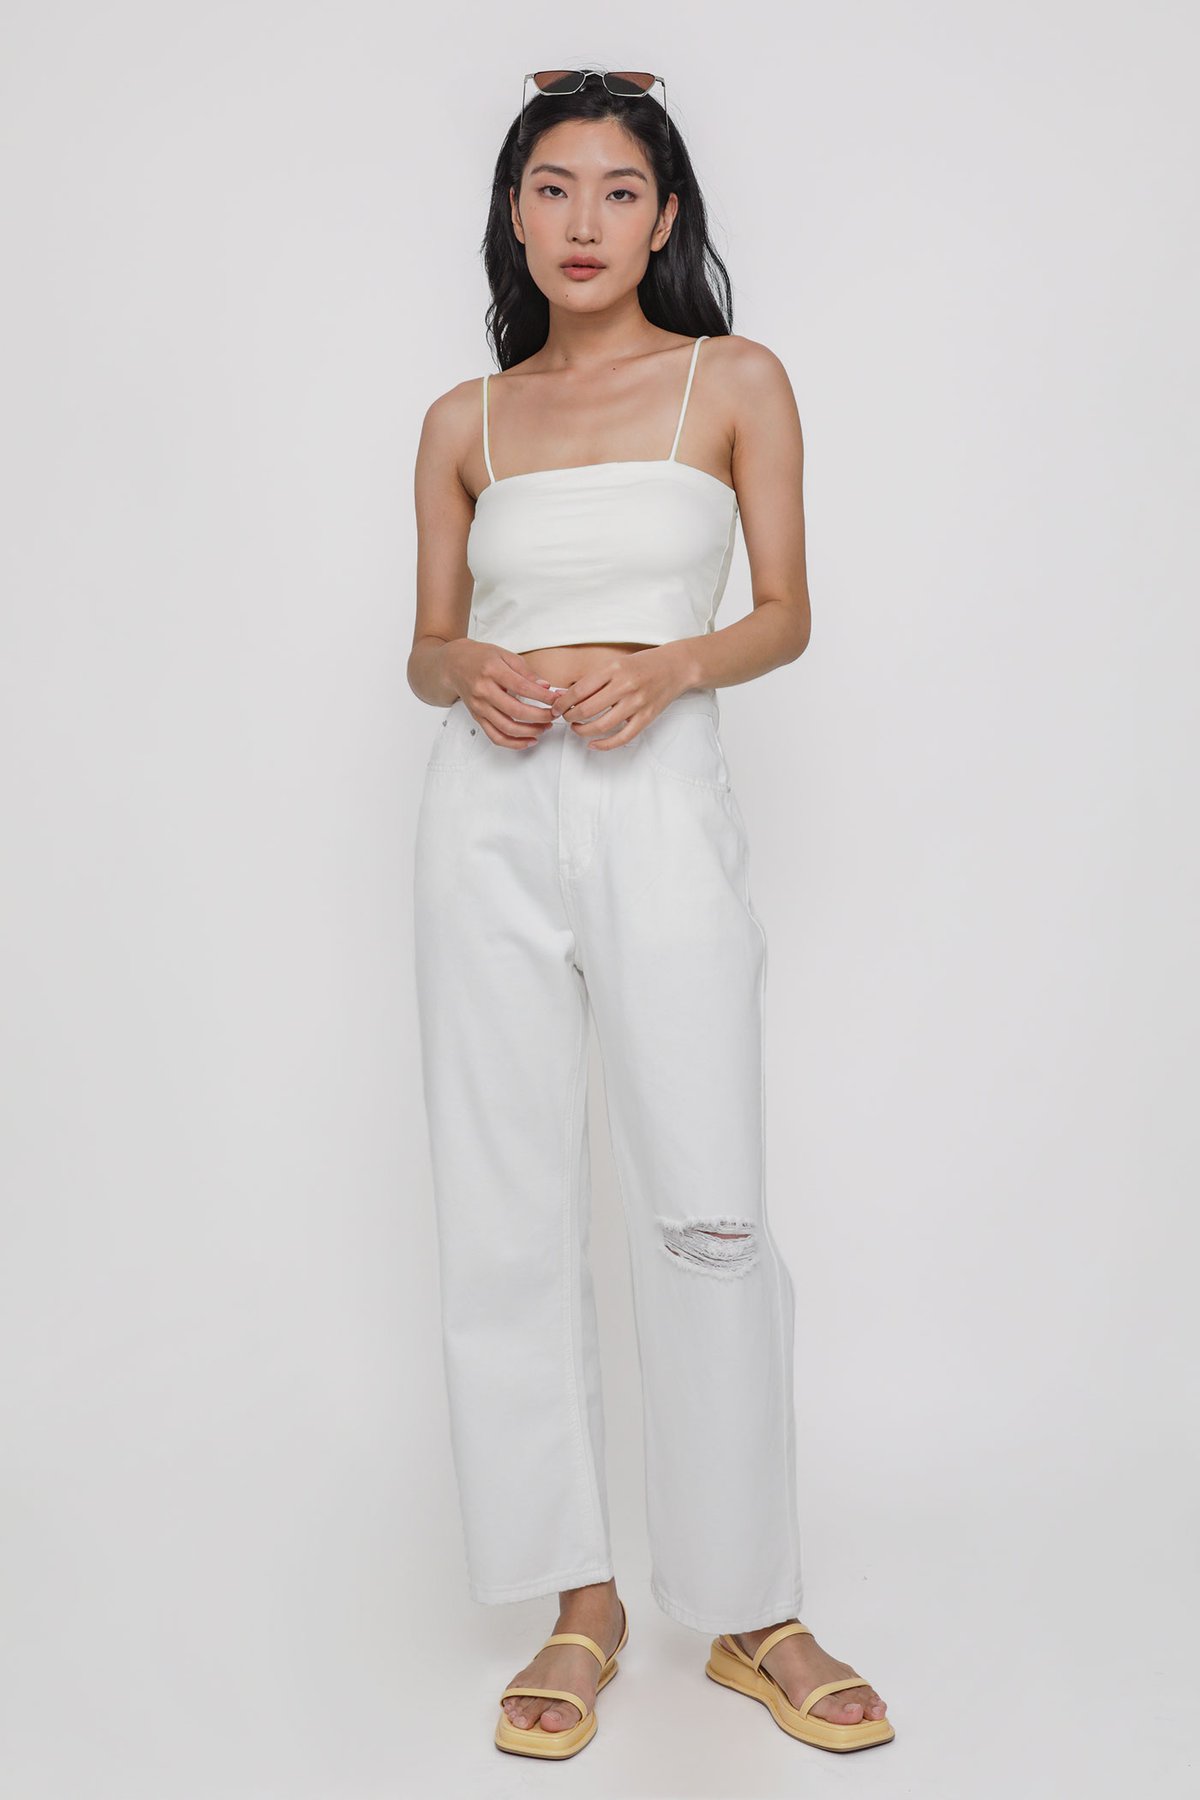 Andes Padded Crop Top (White)